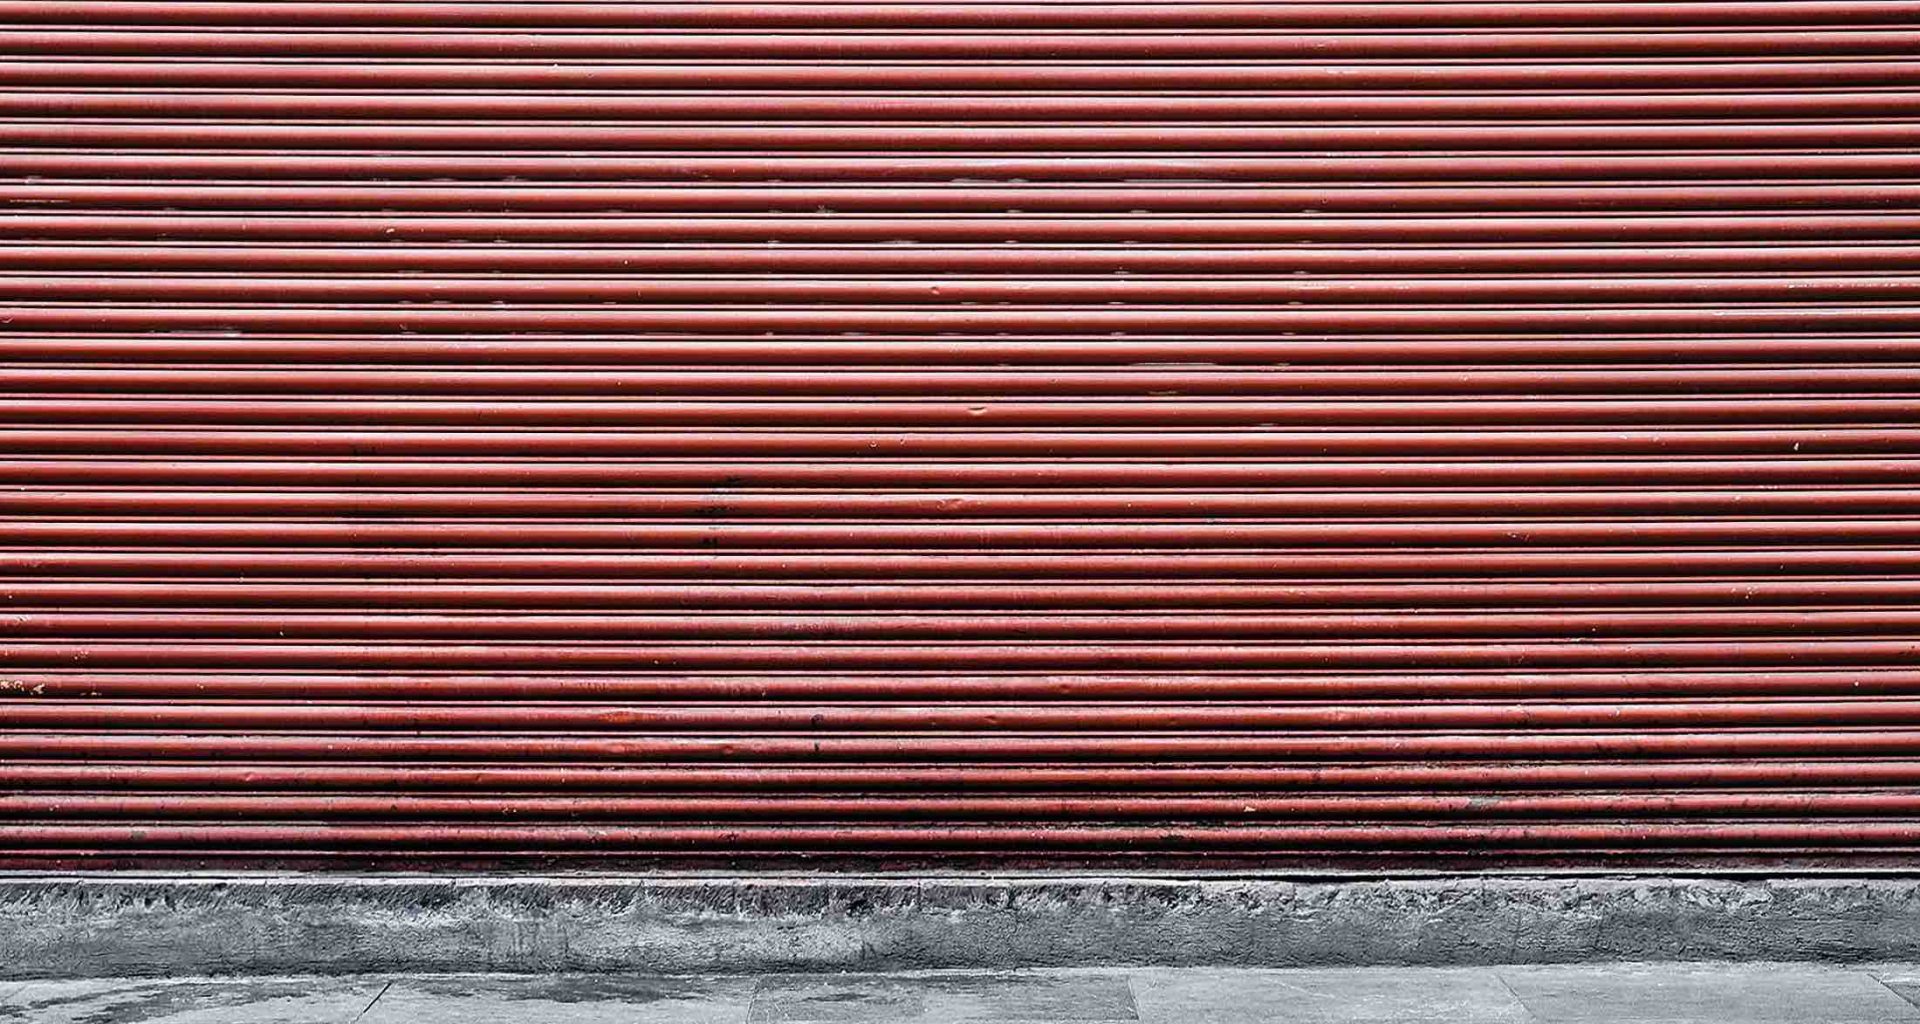 The Many Reasons Why People Use A Self-Storage Unit - Alvinology